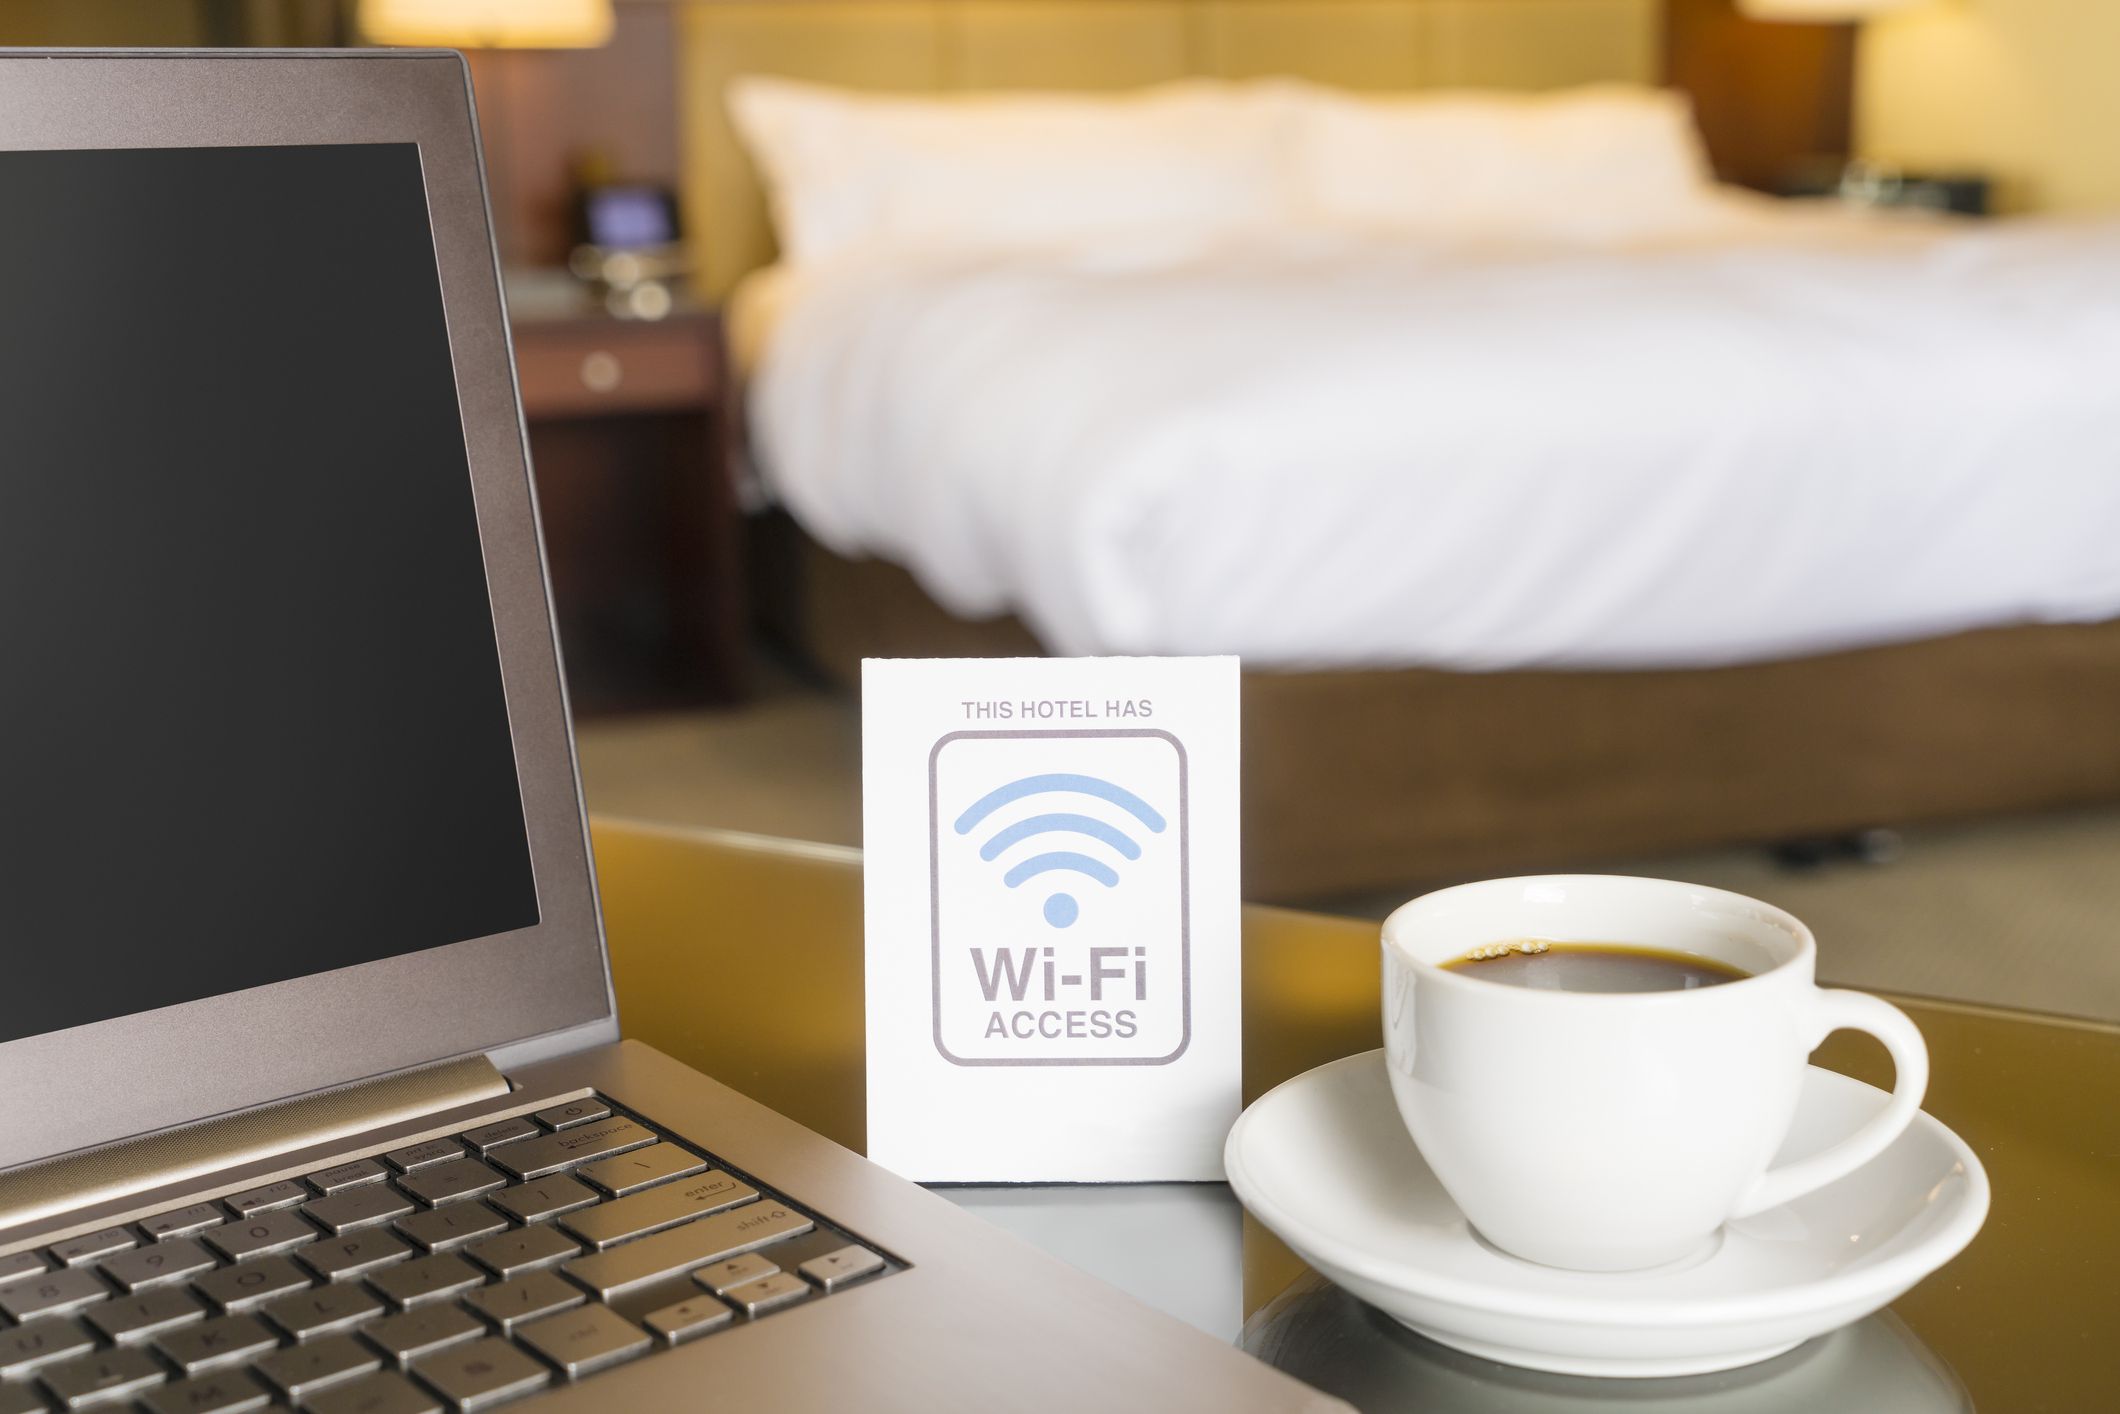 <p>Woe betides the hotel that dares to provide slow internet. It’s no longer seen as a perk but an essential, as you would with fresh towels. <a href="https://www.traveloffpath.com/top-hotel-chains-that-have-fast-internet-and-are-perfect-for-digital-nomads/">According to a survey</a> published by HighSpeedInternet.com last year, 84% of Americans consider Wi-Fi important for their short and long-term stays, and 30% consider a good internet connection “essential.” But how fast should you expect the Wi-Fi to be? According to Tom Paton of Broadband Savvy in an <a href="https://www.usatoday.com/story/travel/hotels/2022/05/27/hotel-wi-fi-signal-strength/9944168002/">article by USA Today</a>, 25 megabits per second is the minimum. Hotel brands like Marriott, Ritz-Carlton, Holiday Inn, and the Intercontinental typically provide this and more. </p>